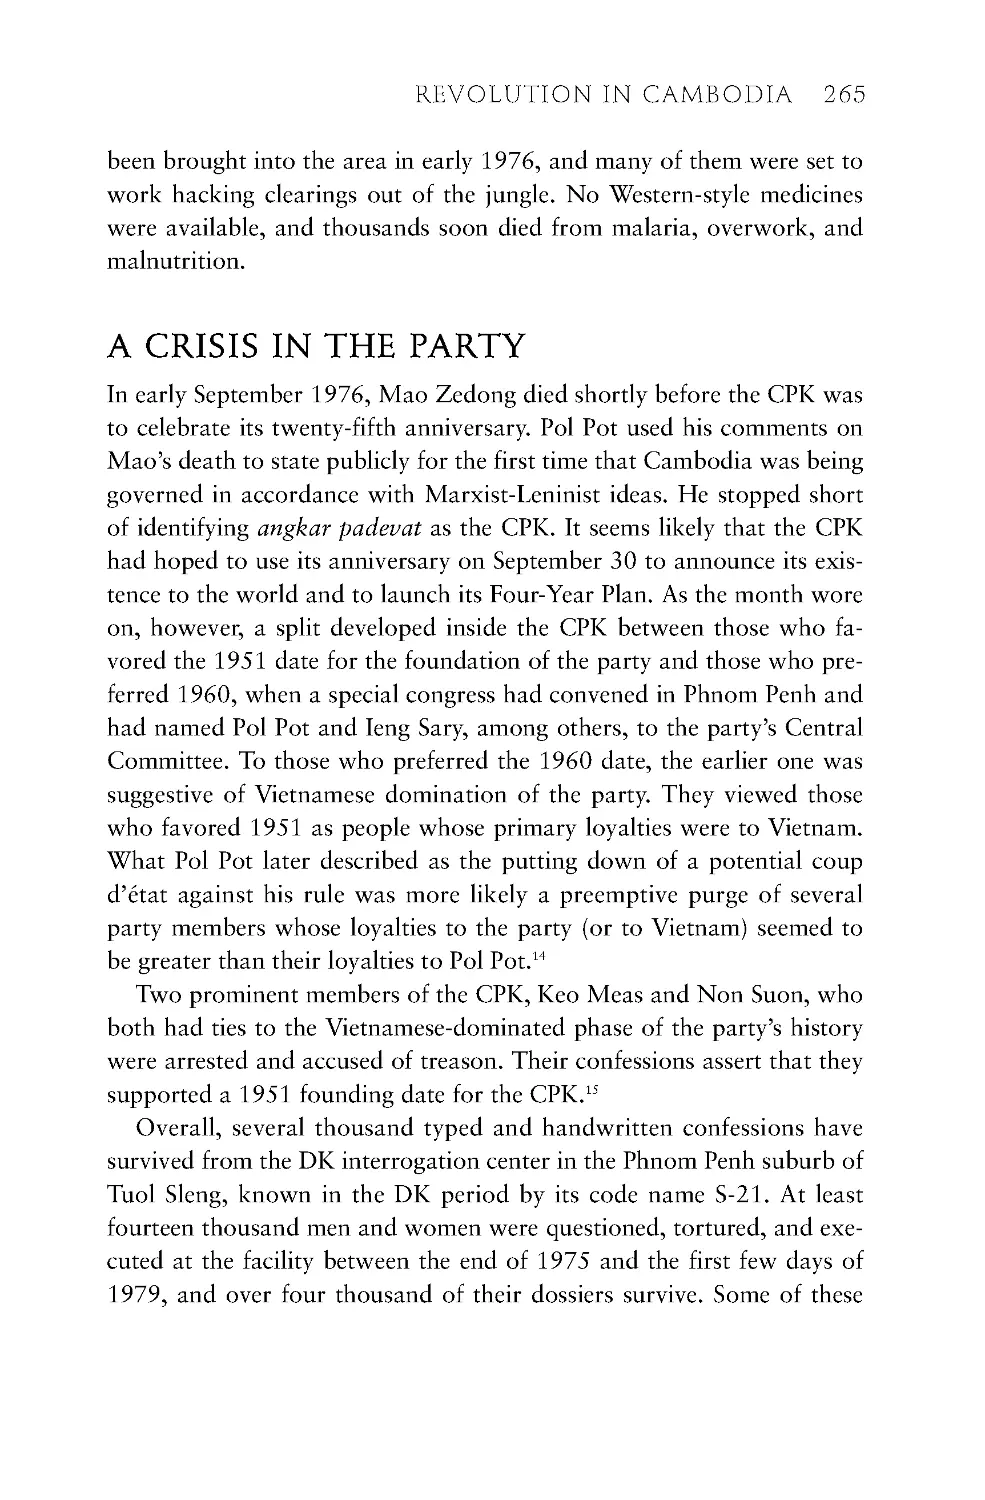 A Crisis in the Party